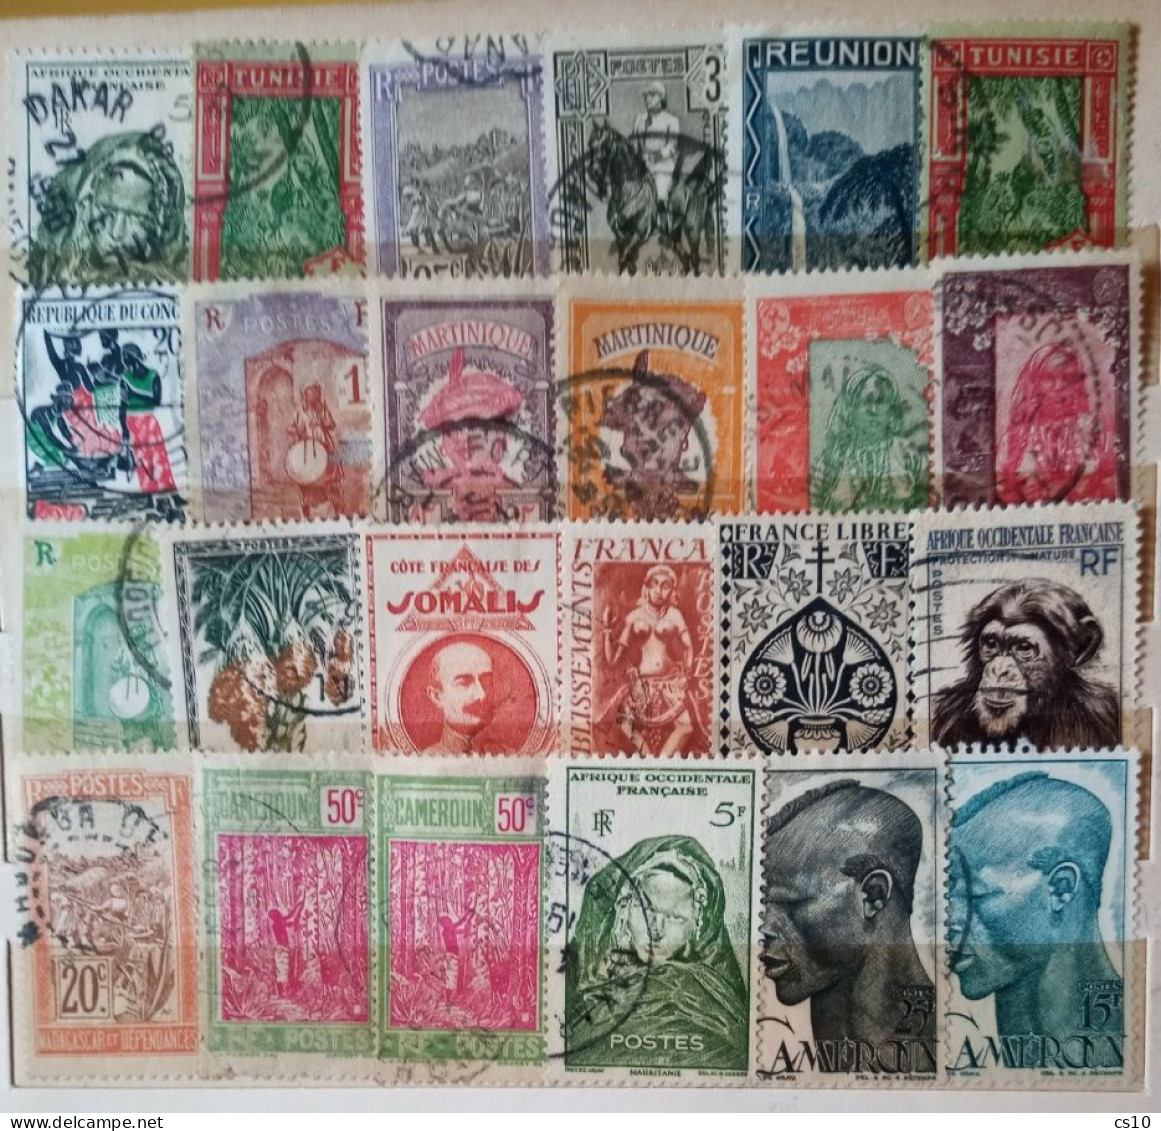 FRANCE Old Colonies 15 scans lot mainly Used Including ADV Tabs, on-piece, Blocks, France Libre Provisionals in 450pcs